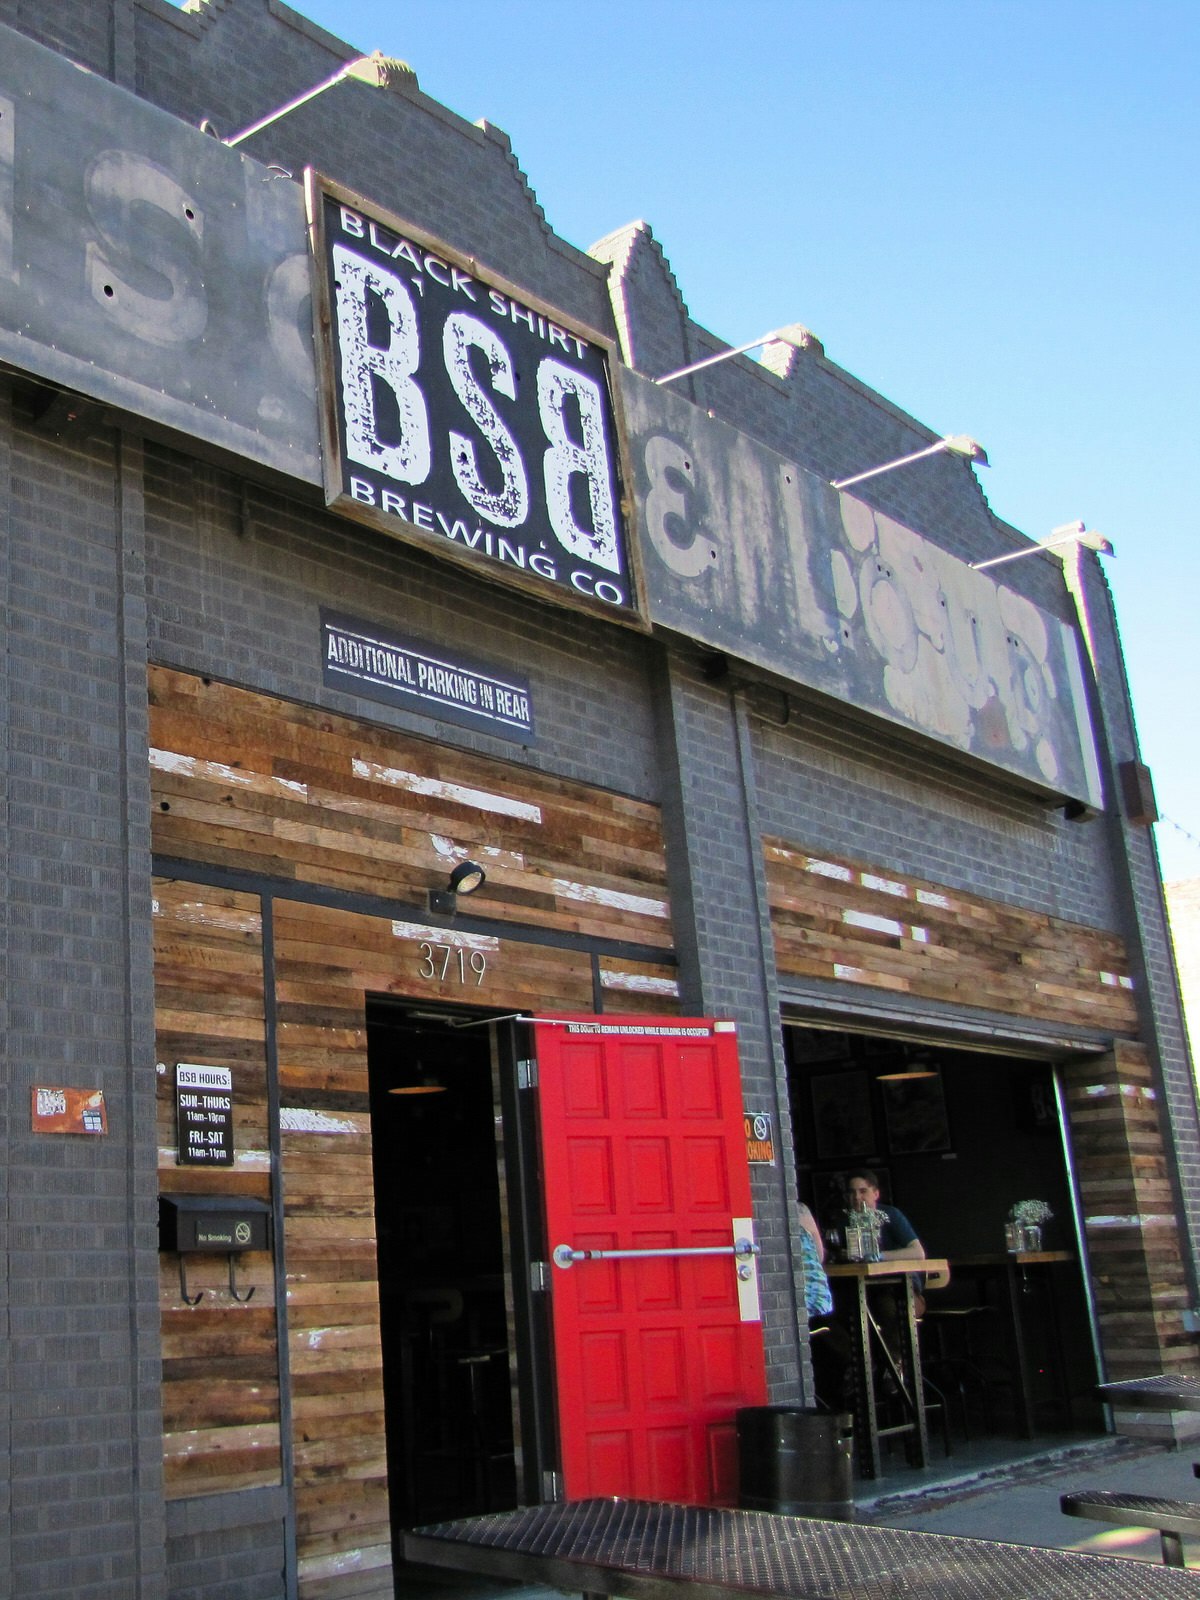 Black Shirt Brewery is situated within stumbling distance of other shops in the RiNo Art District © Liza Prado / Lonely Planet